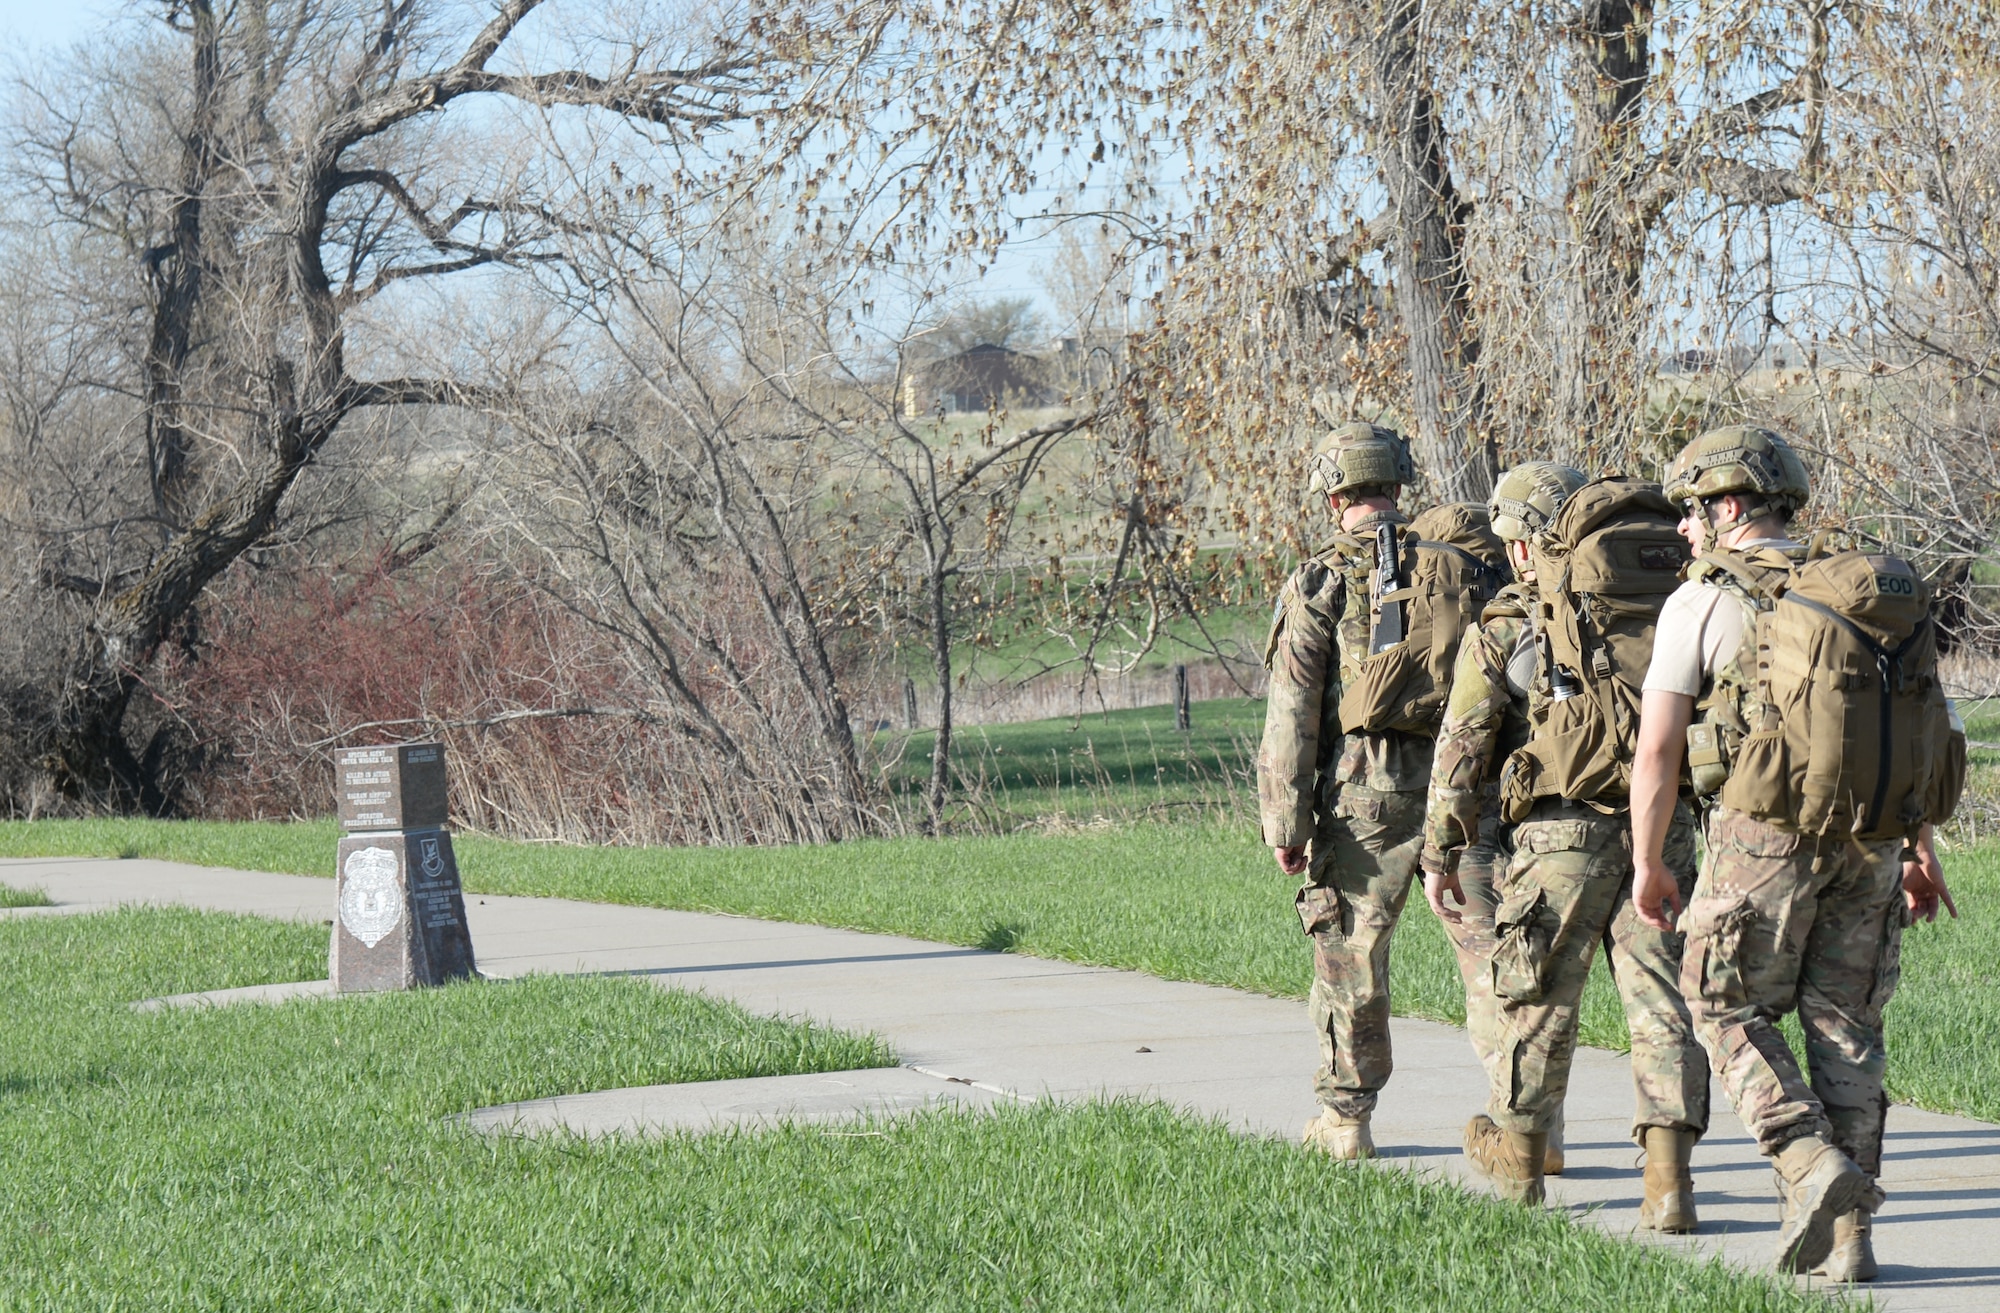 Members of the 28th Civil Engineer Squadron Explosive Ordnance Disposal Flight arrive at the memorial of Staff Sgt. Bryan Berky during 50th Anniversary EOD Memorial Day ruck march at Ellsworth, May 4, 2018. National EOD Memorial Day is designated by Congress as the first Saturday of May to honor of EOD technicians who lost their lives while conducting operations across the globe. (U.S. Air Force photo by Airman 1st Class Nicolas Z. Erwin)